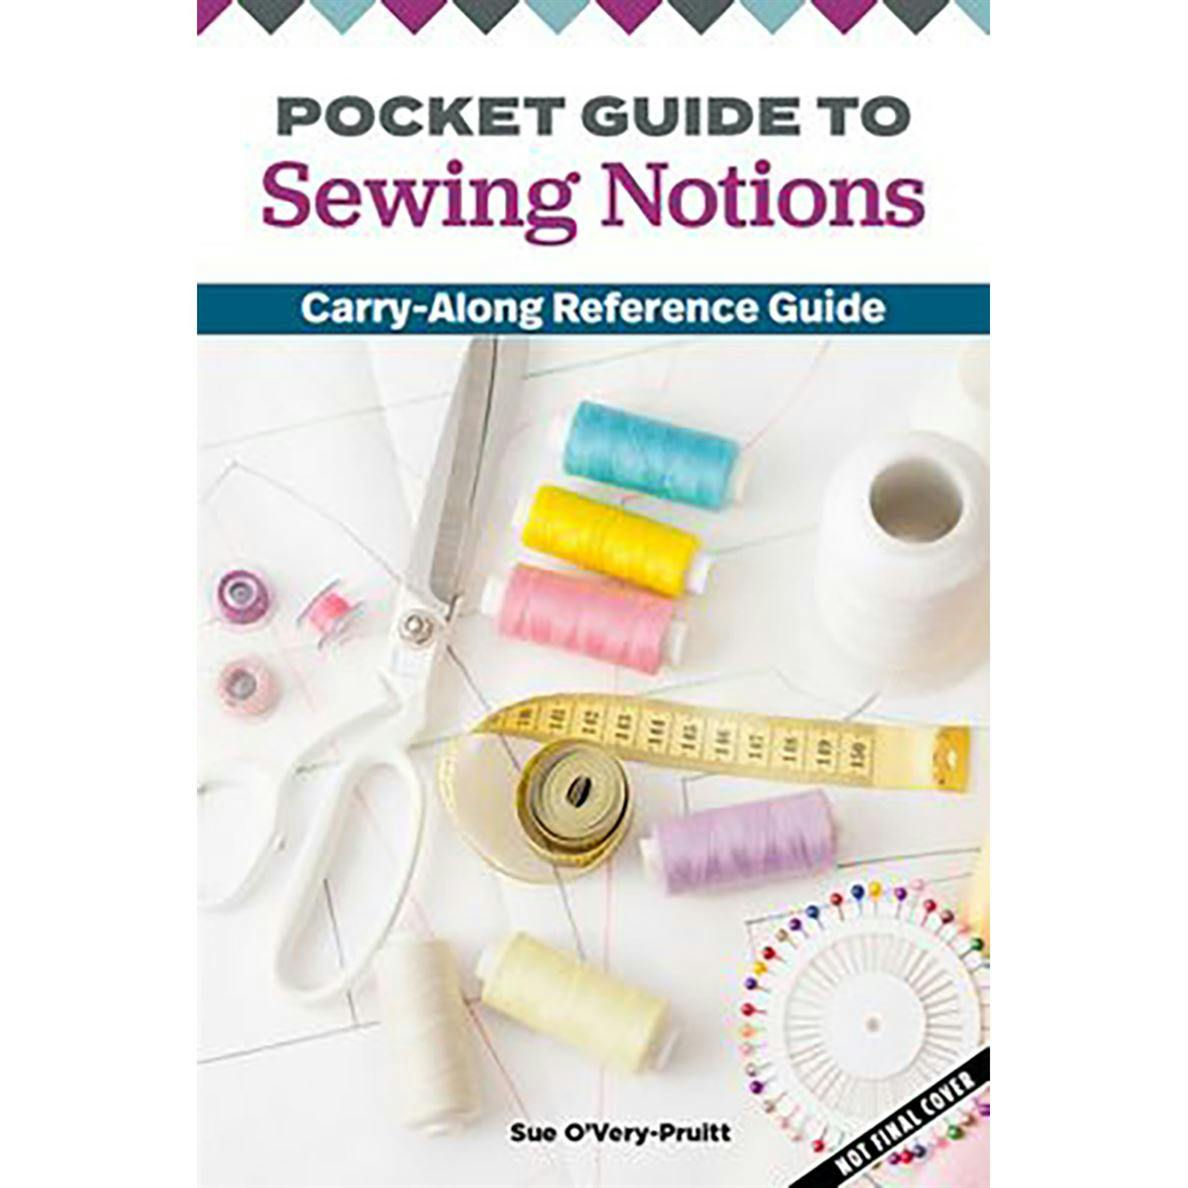 Pocket Guide to Sewing Notions